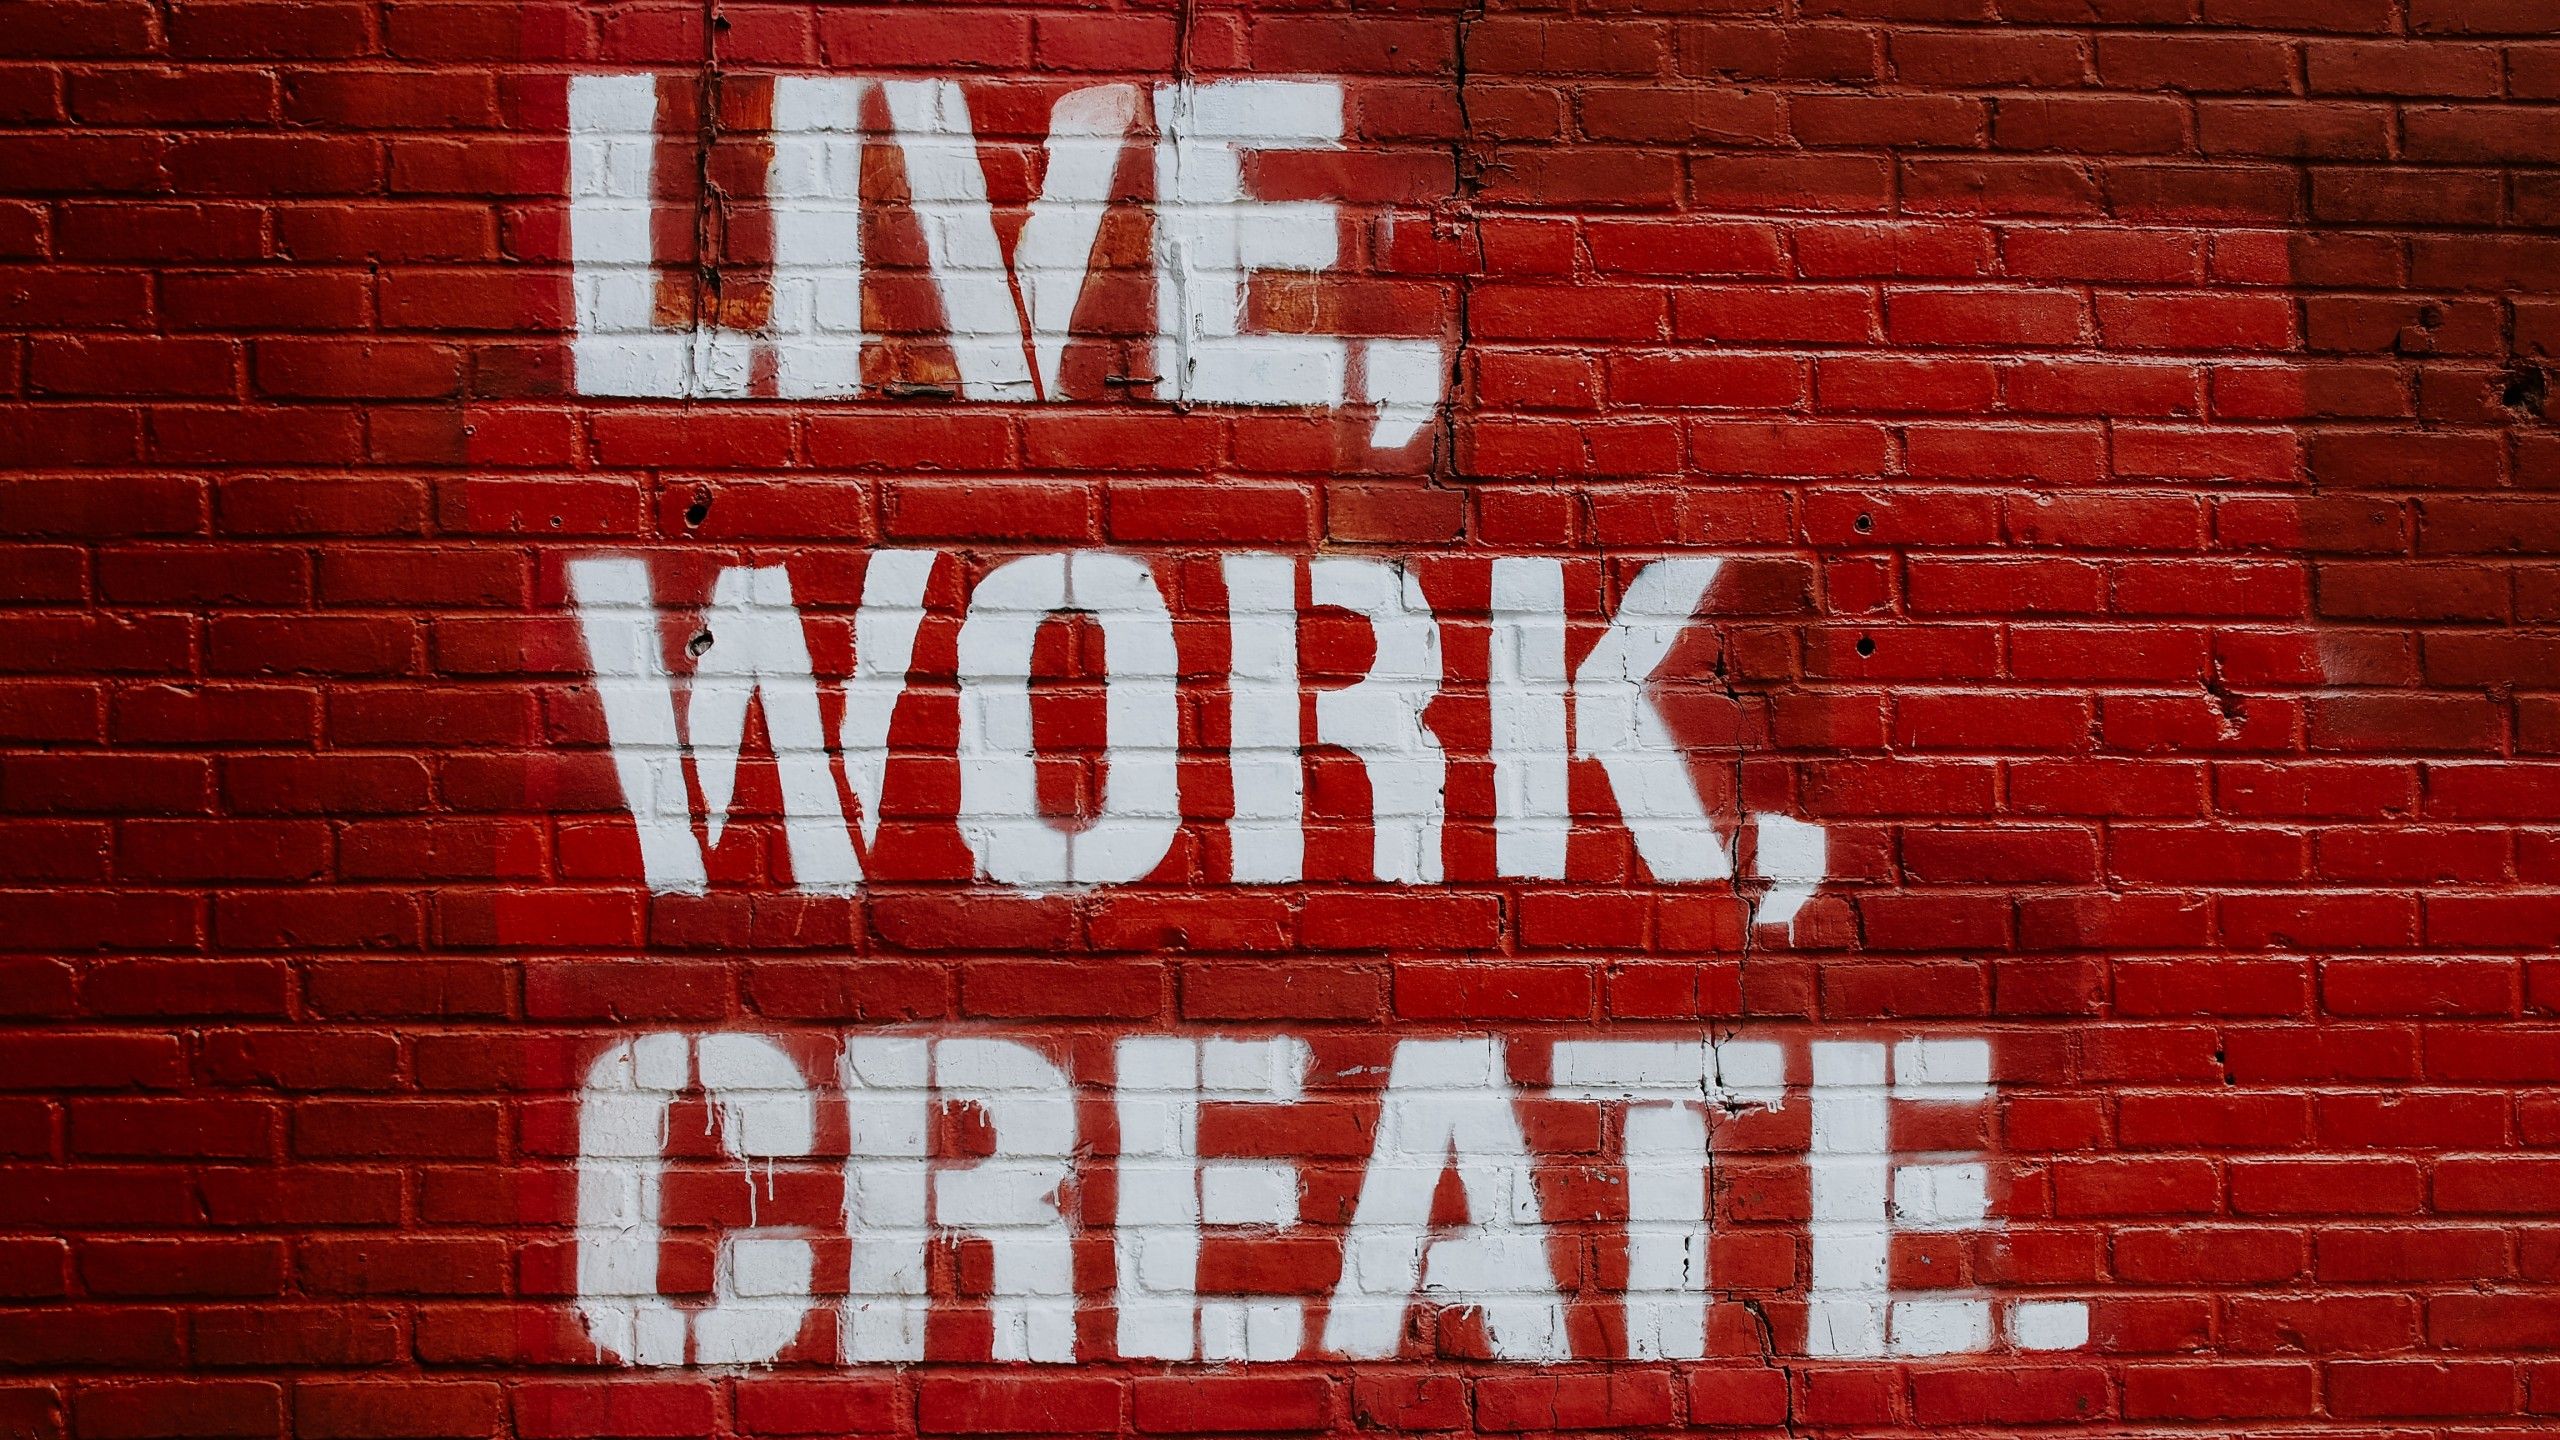 Live 4K Wallpaper, Work, Create, Brick wall, Red, Motivational, Inspirational quotes, Quotes